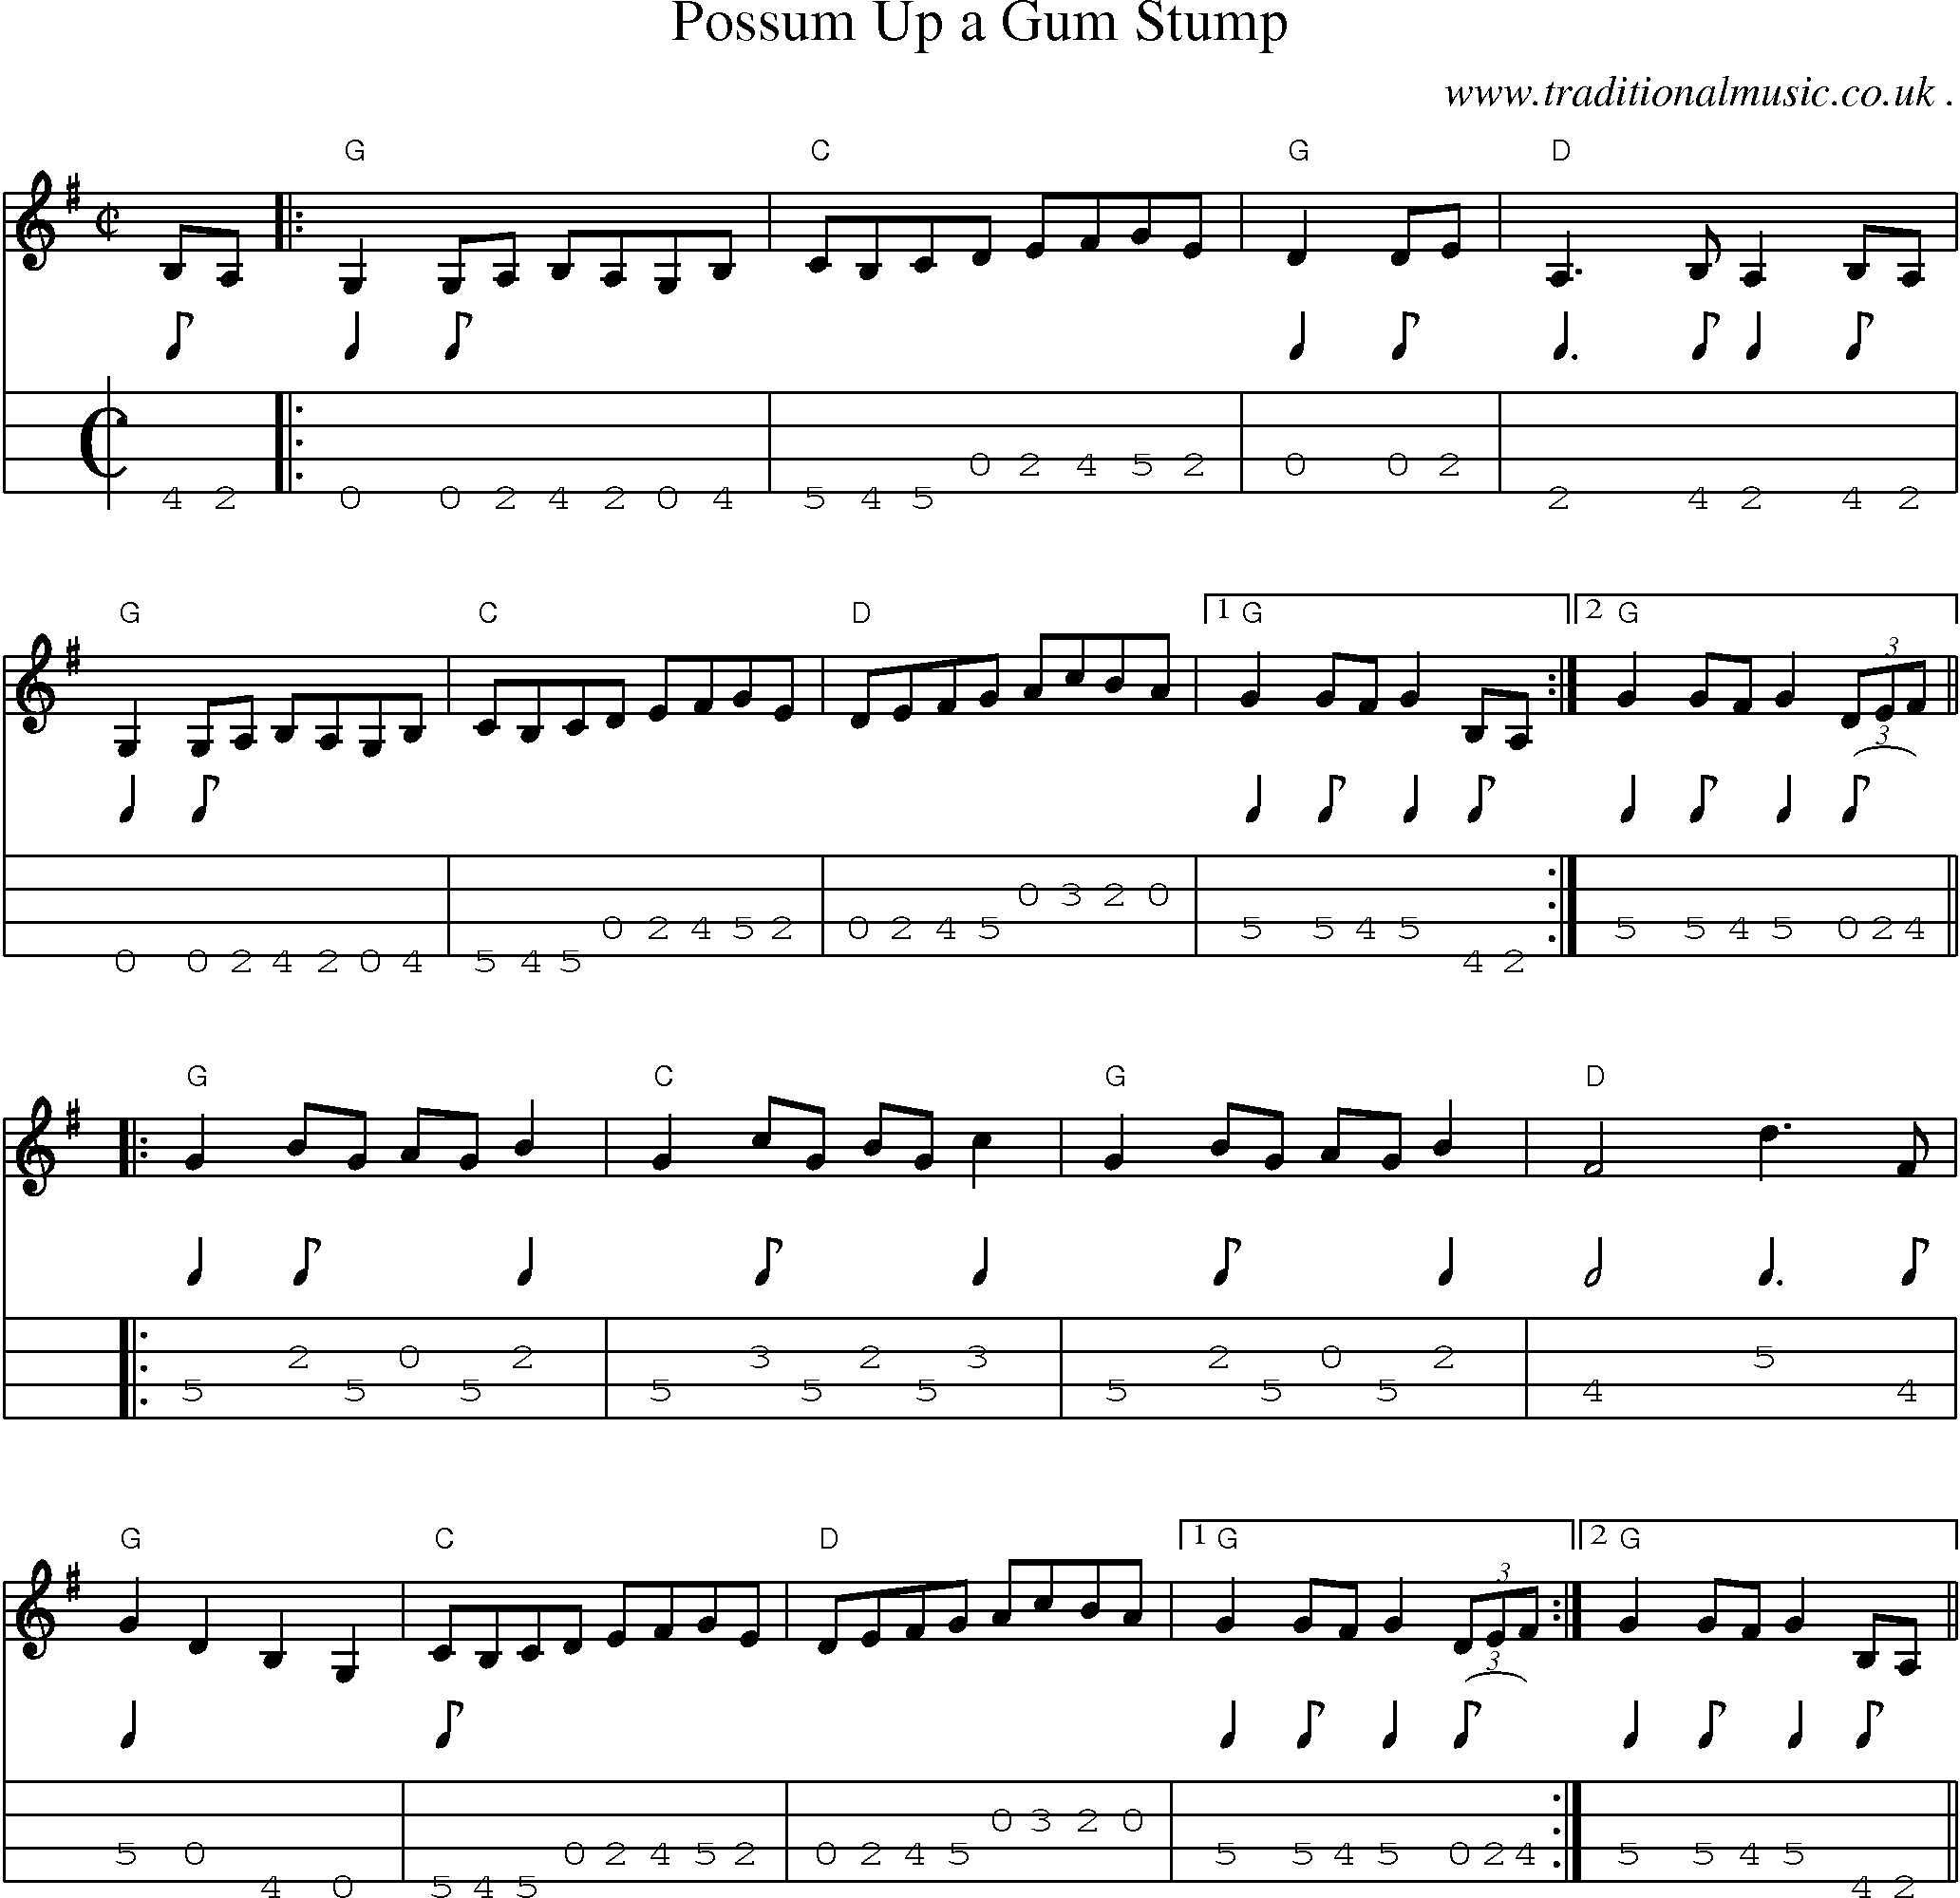 Music Score and Guitar Tabs for Possum Up A Gum Stump